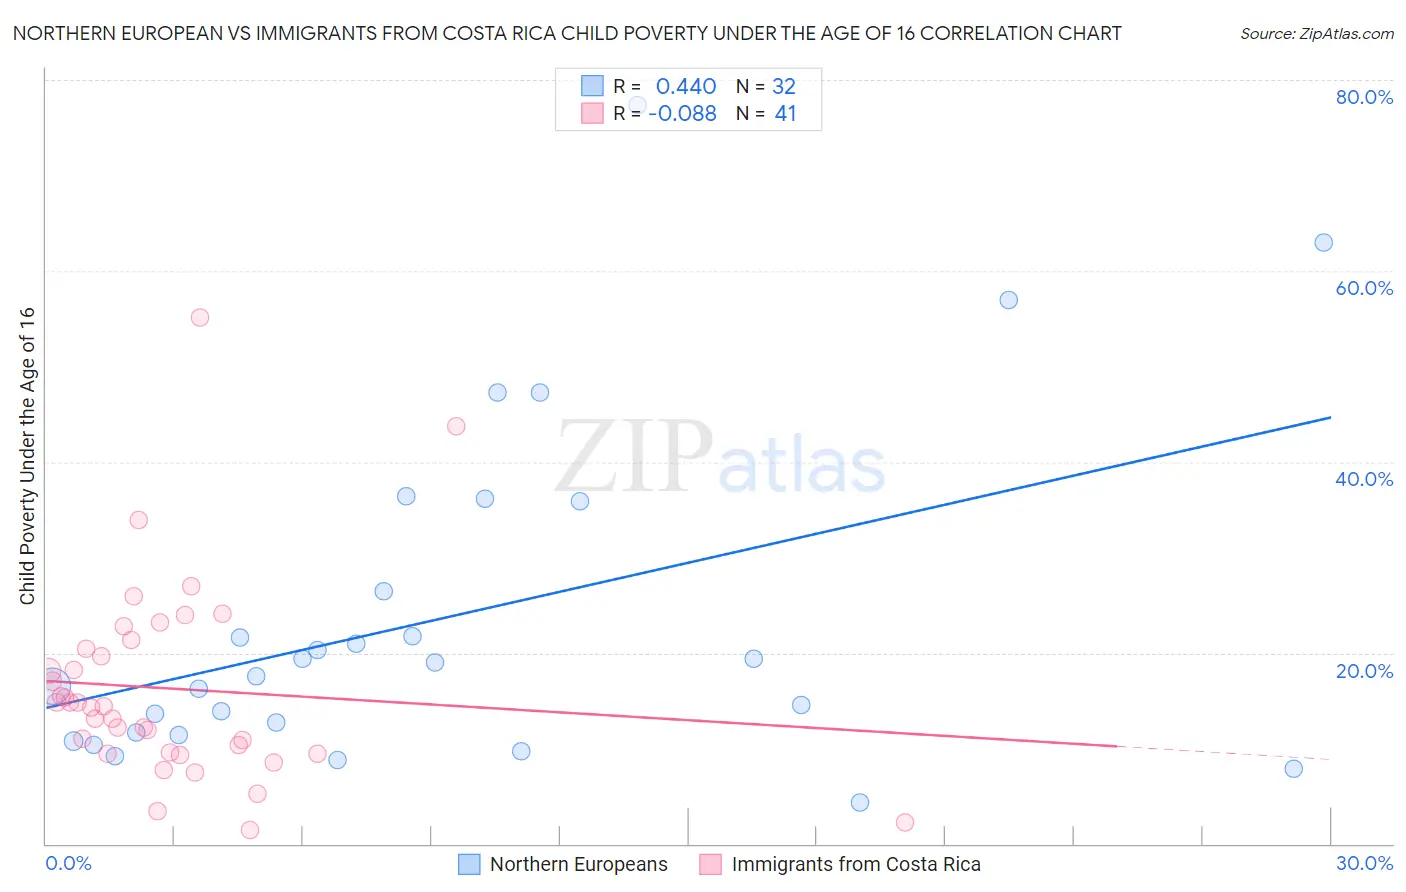 Northern European vs Immigrants from Costa Rica Child Poverty Under the Age of 16